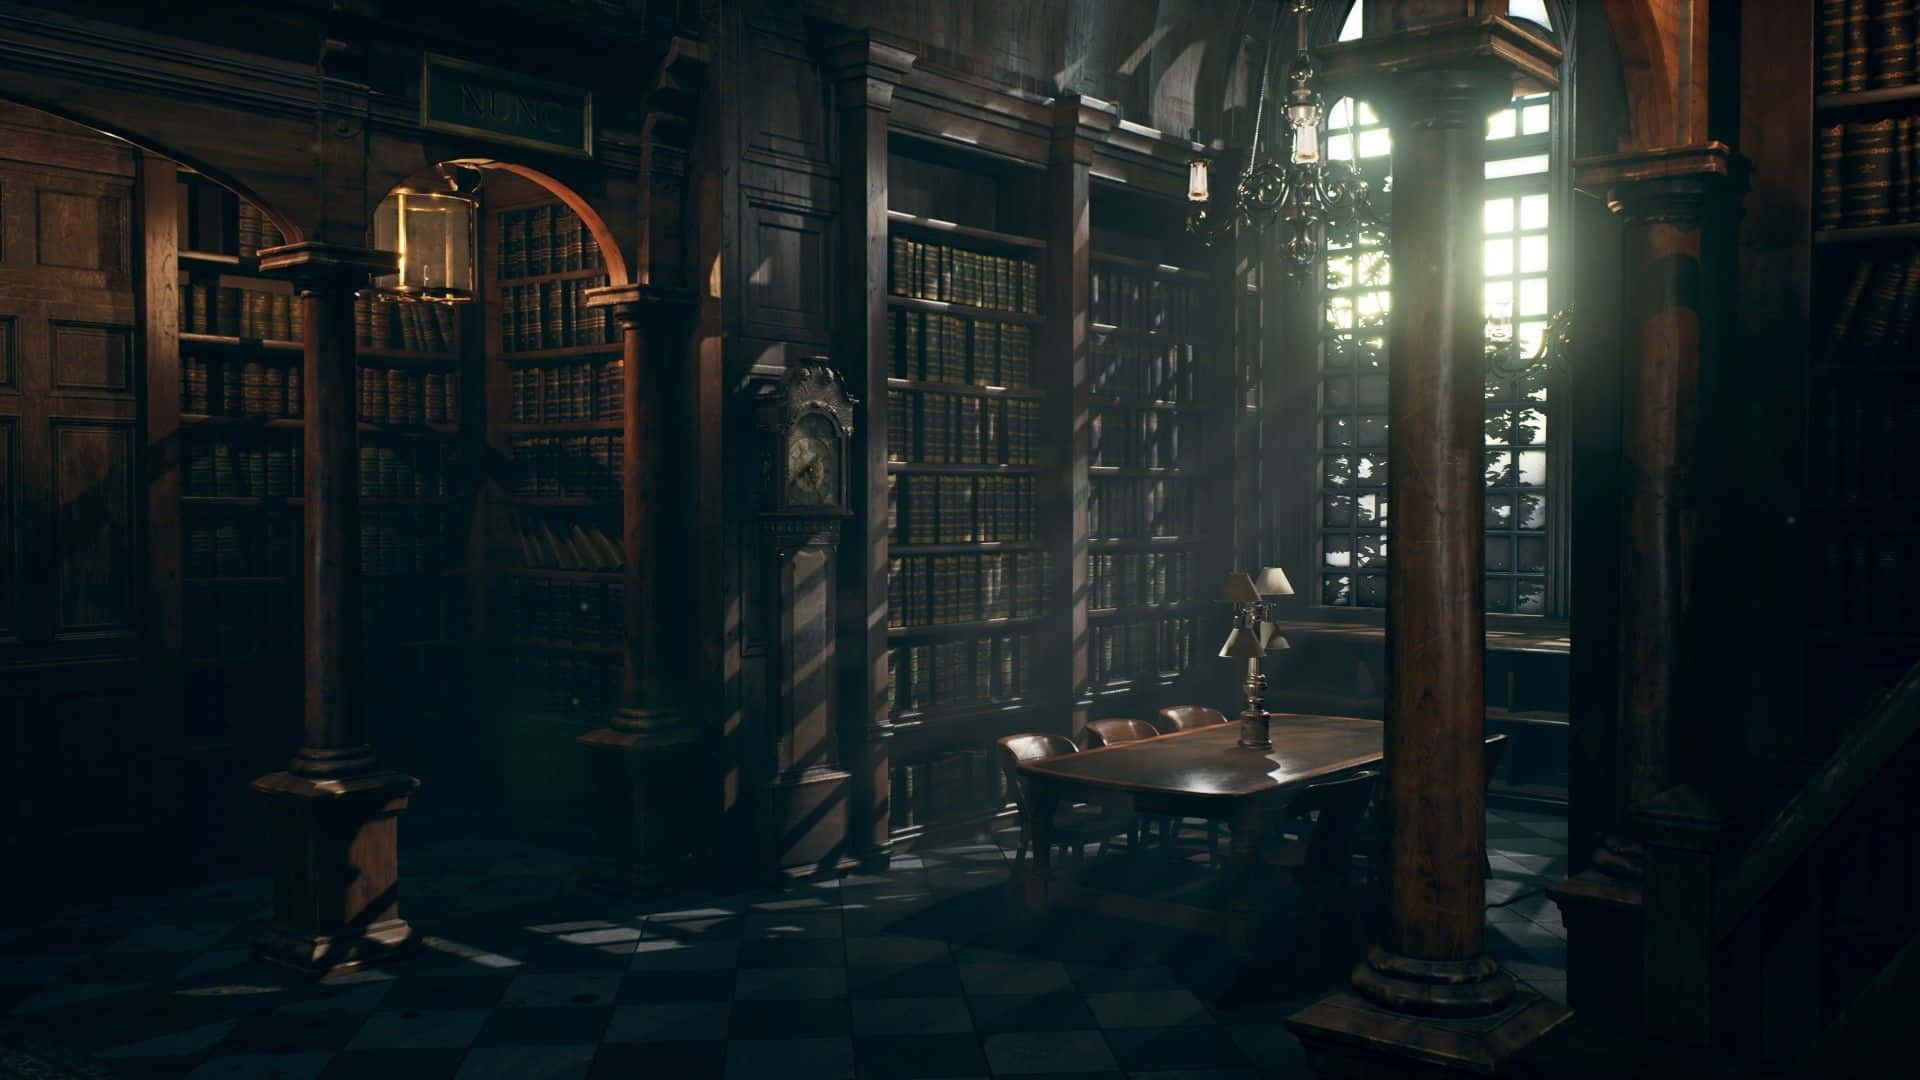 Be Spellbound in the Magical Hogwarts Library Wallpaper